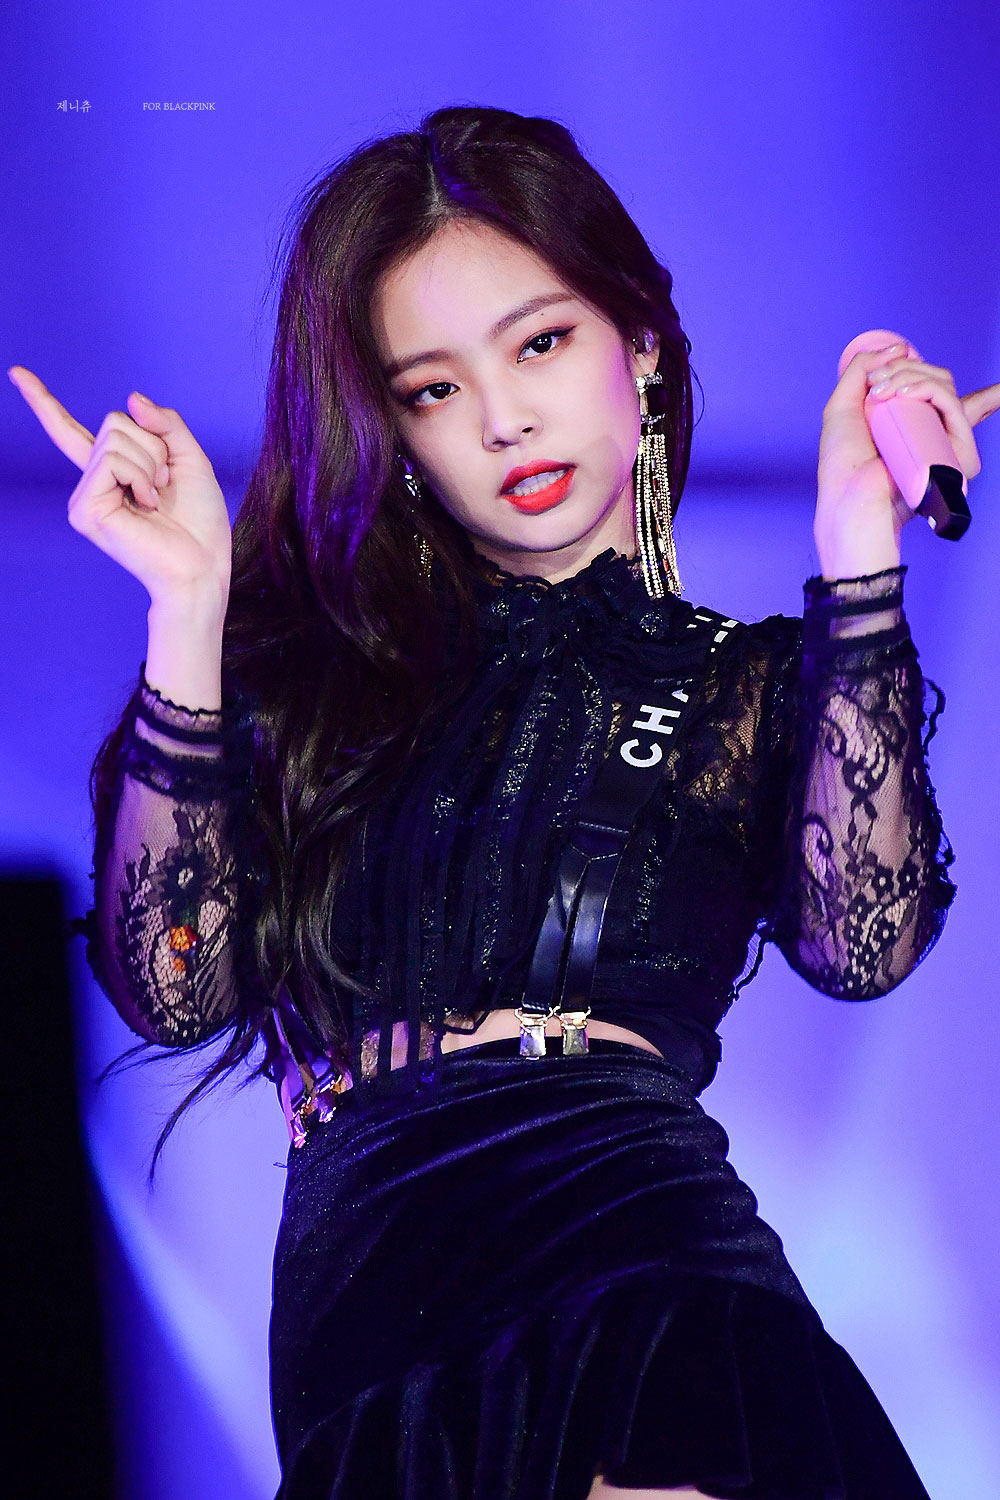 Jennie Blackpink Outfits Skirt Top 10 Sexiest Outfits Of Blackpink Jennie Koreaboo See